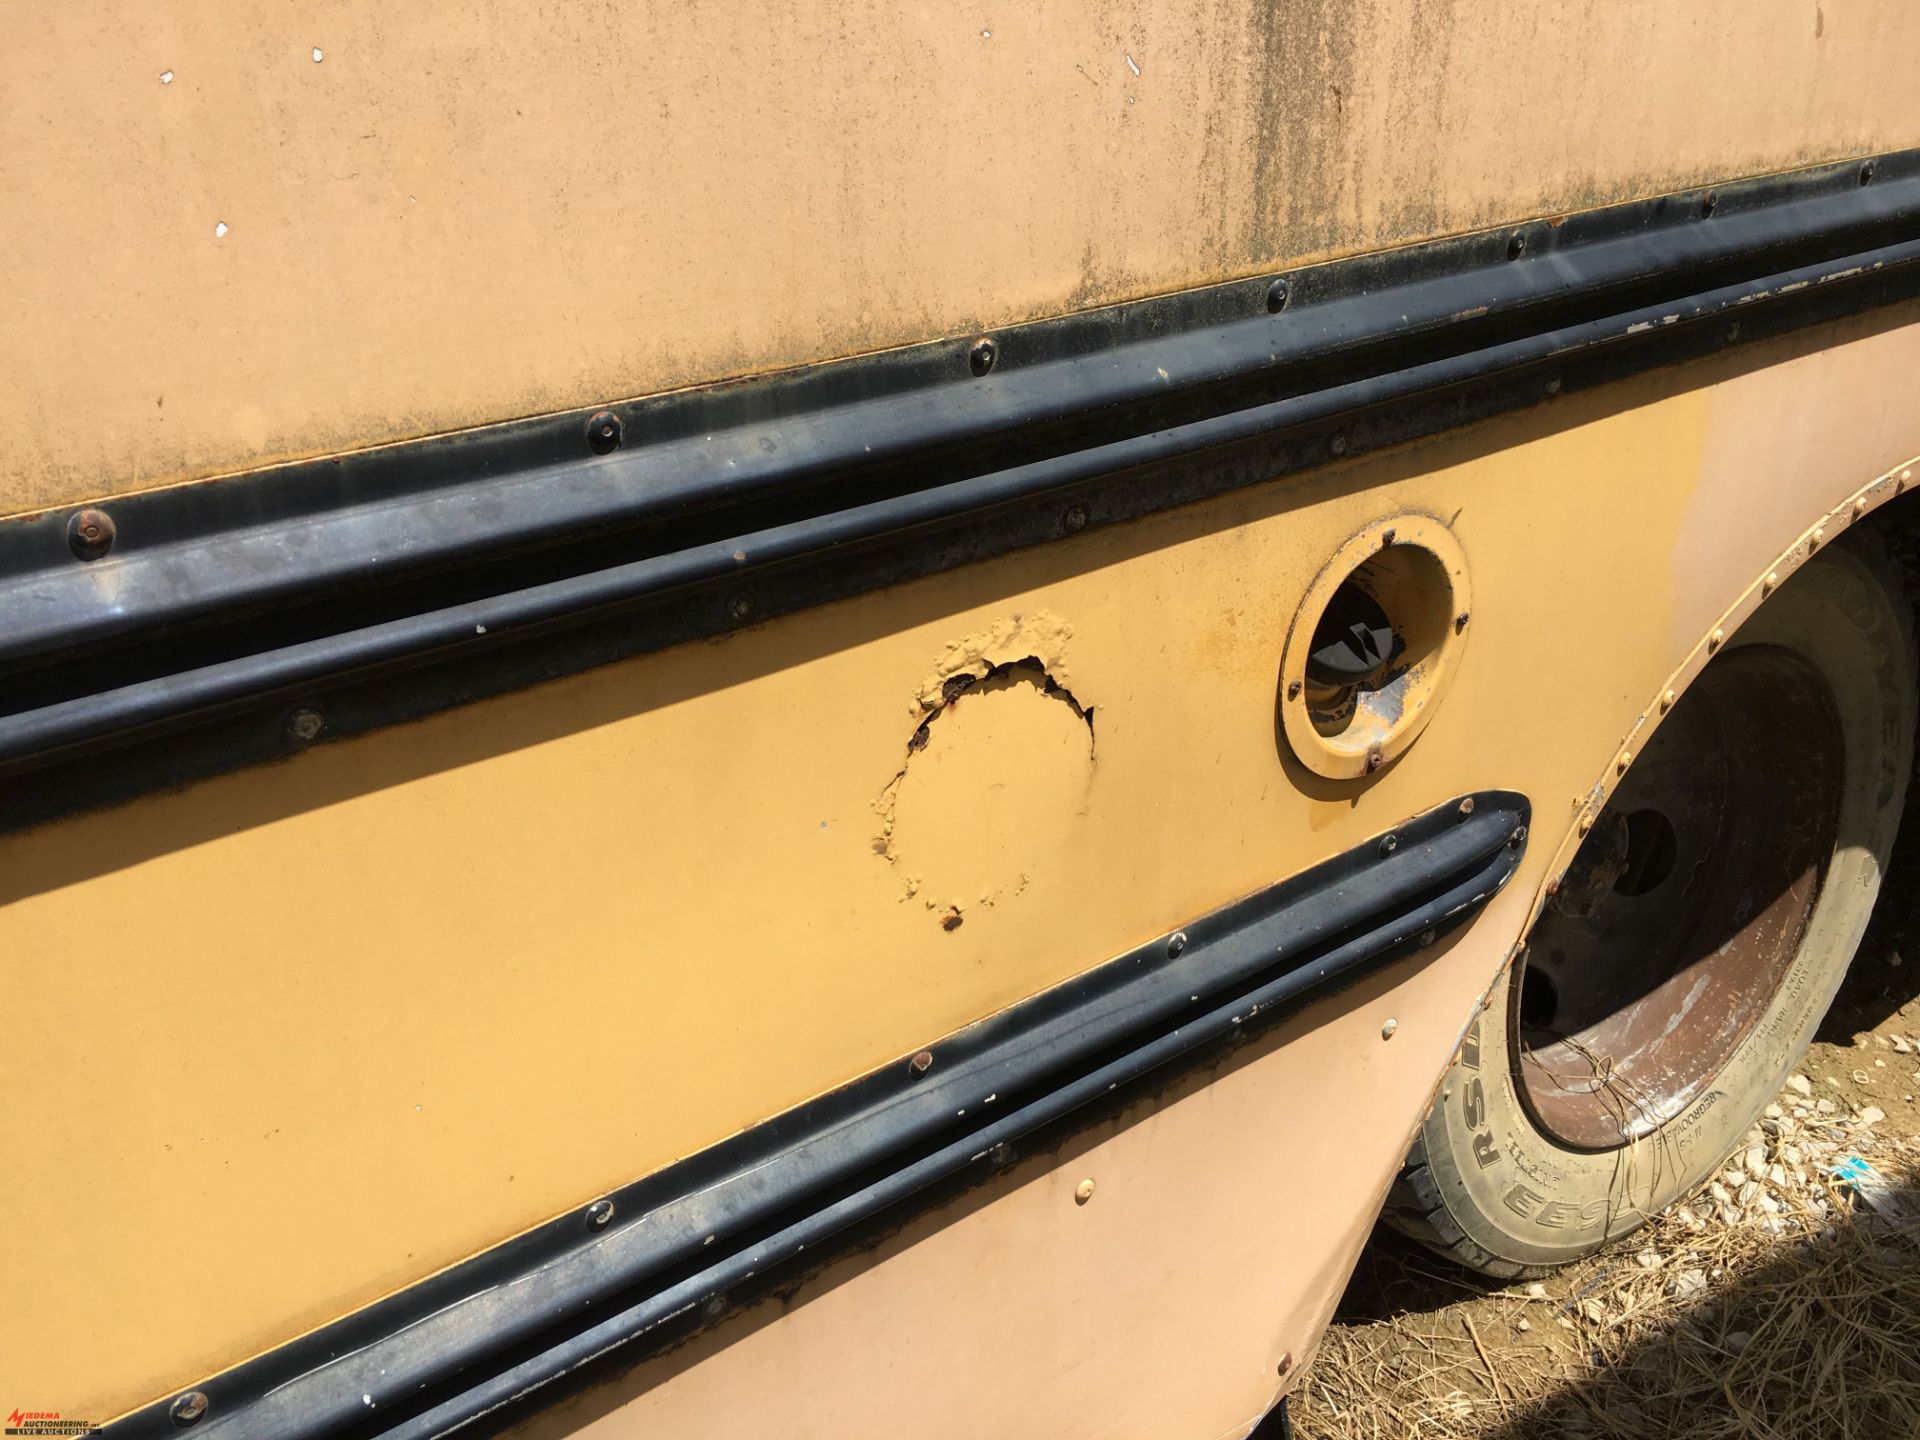 1993 CROWN MINI SCHOOL BUS, 350, AUTOMATIC, BEEN SITTING FOR A LONG TIME, DINGS/SCRATCHES/DENTS/ - Image 6 of 11